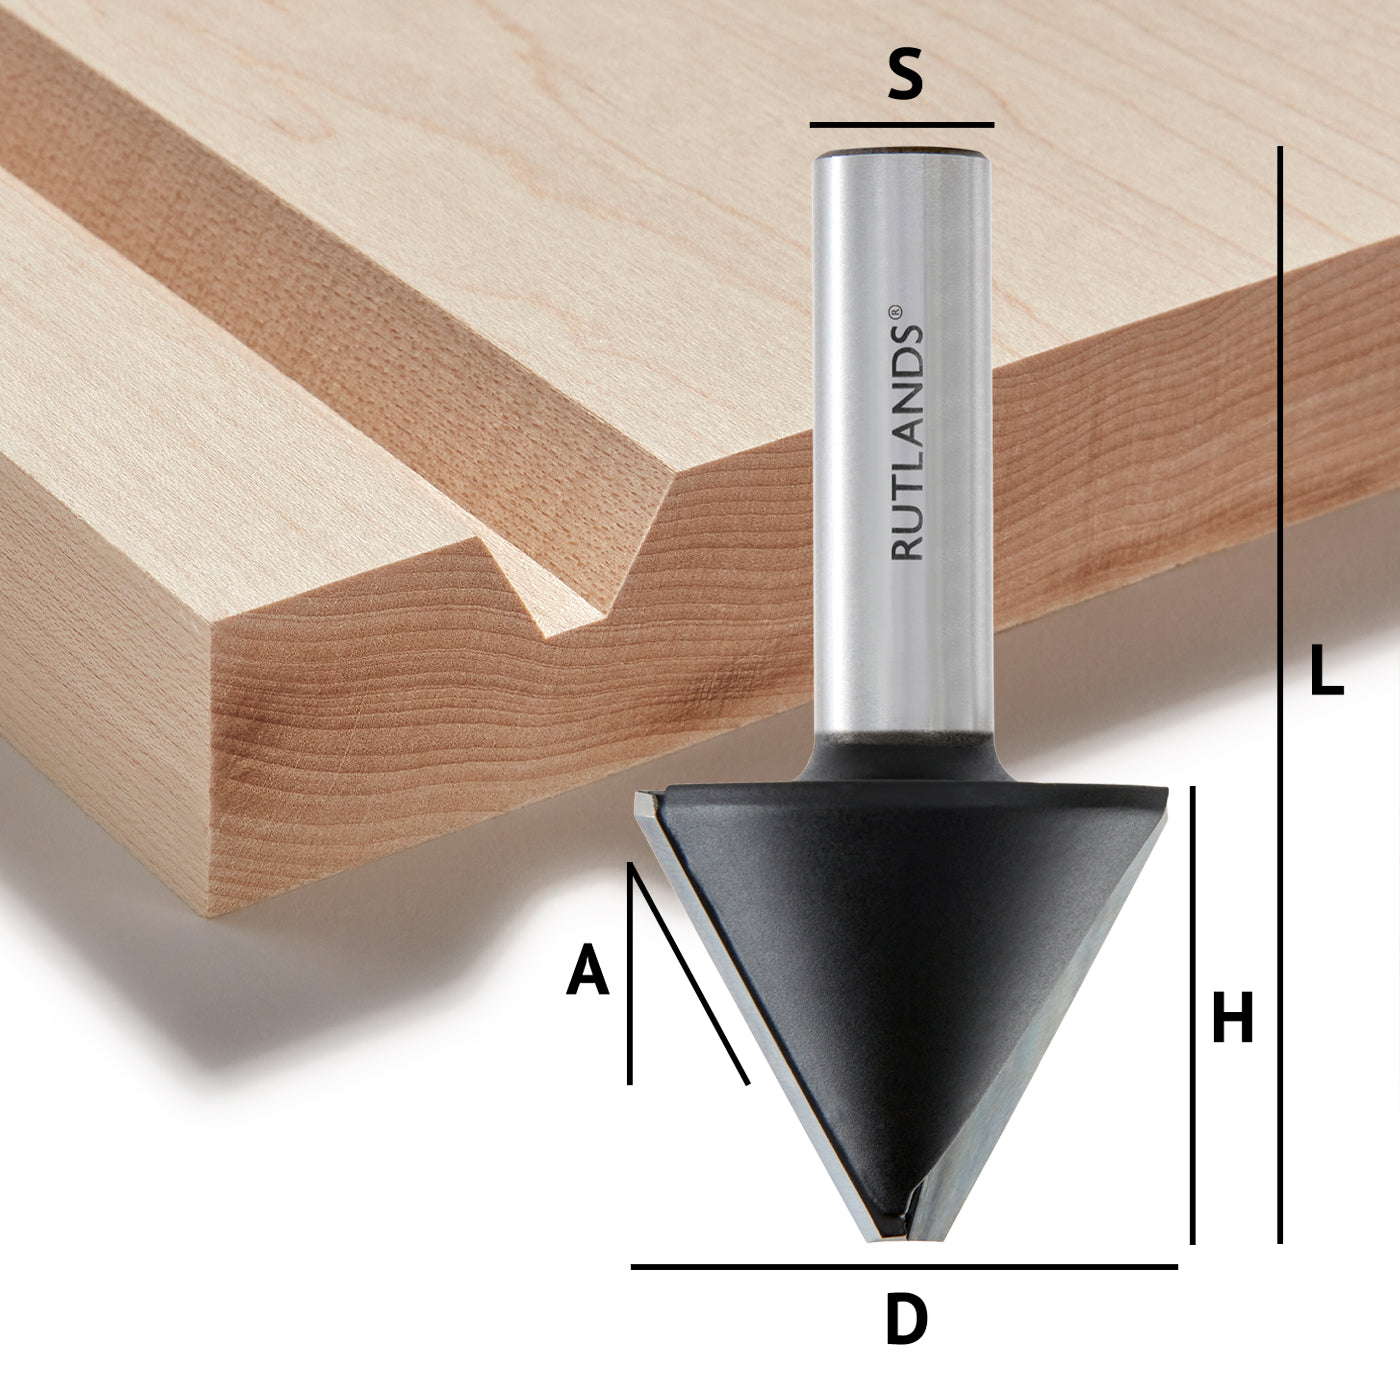 Router Bit - Bevel with End Cutting